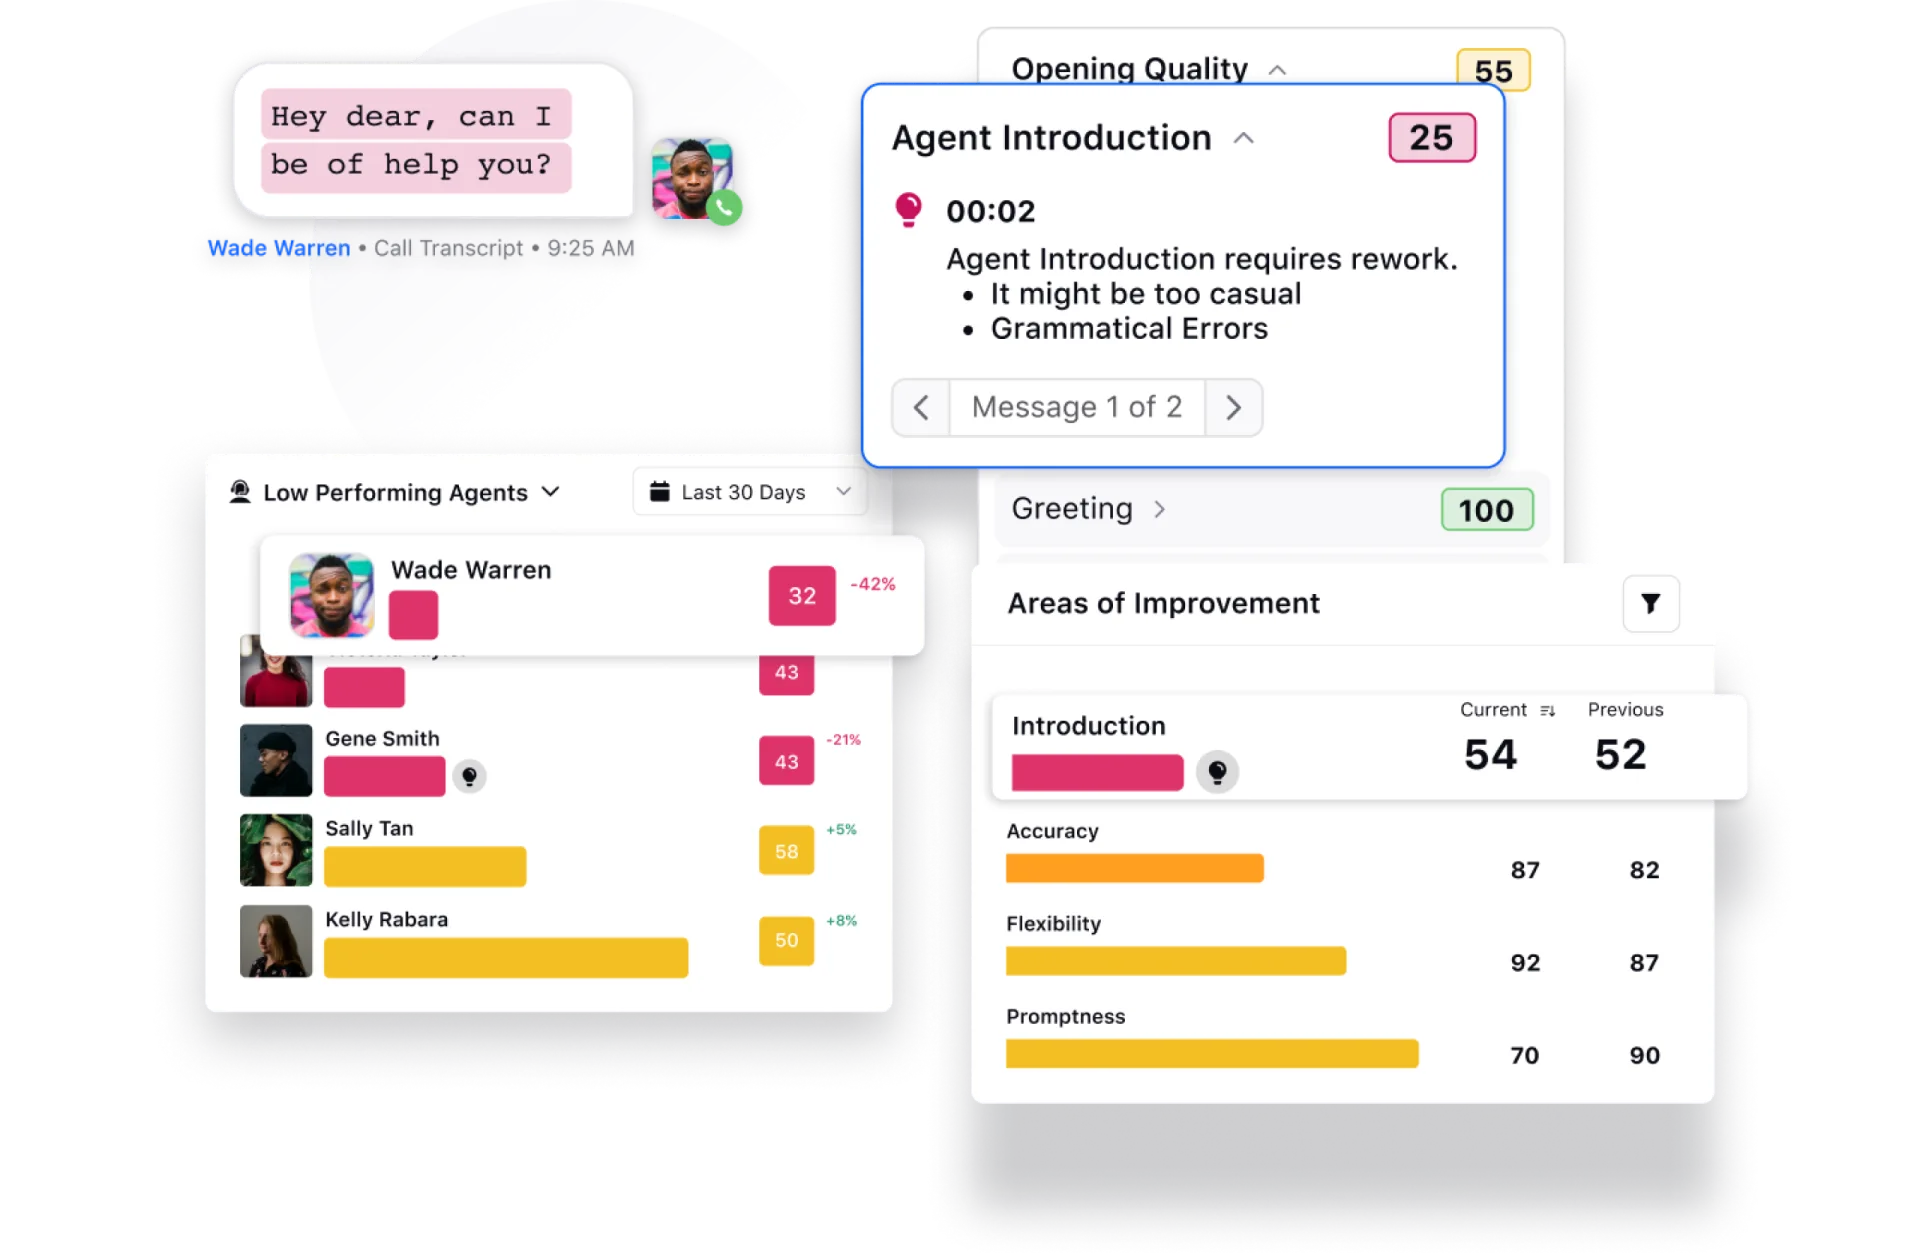 AI-powered automated scoring with Sprinklr Quality Management Software